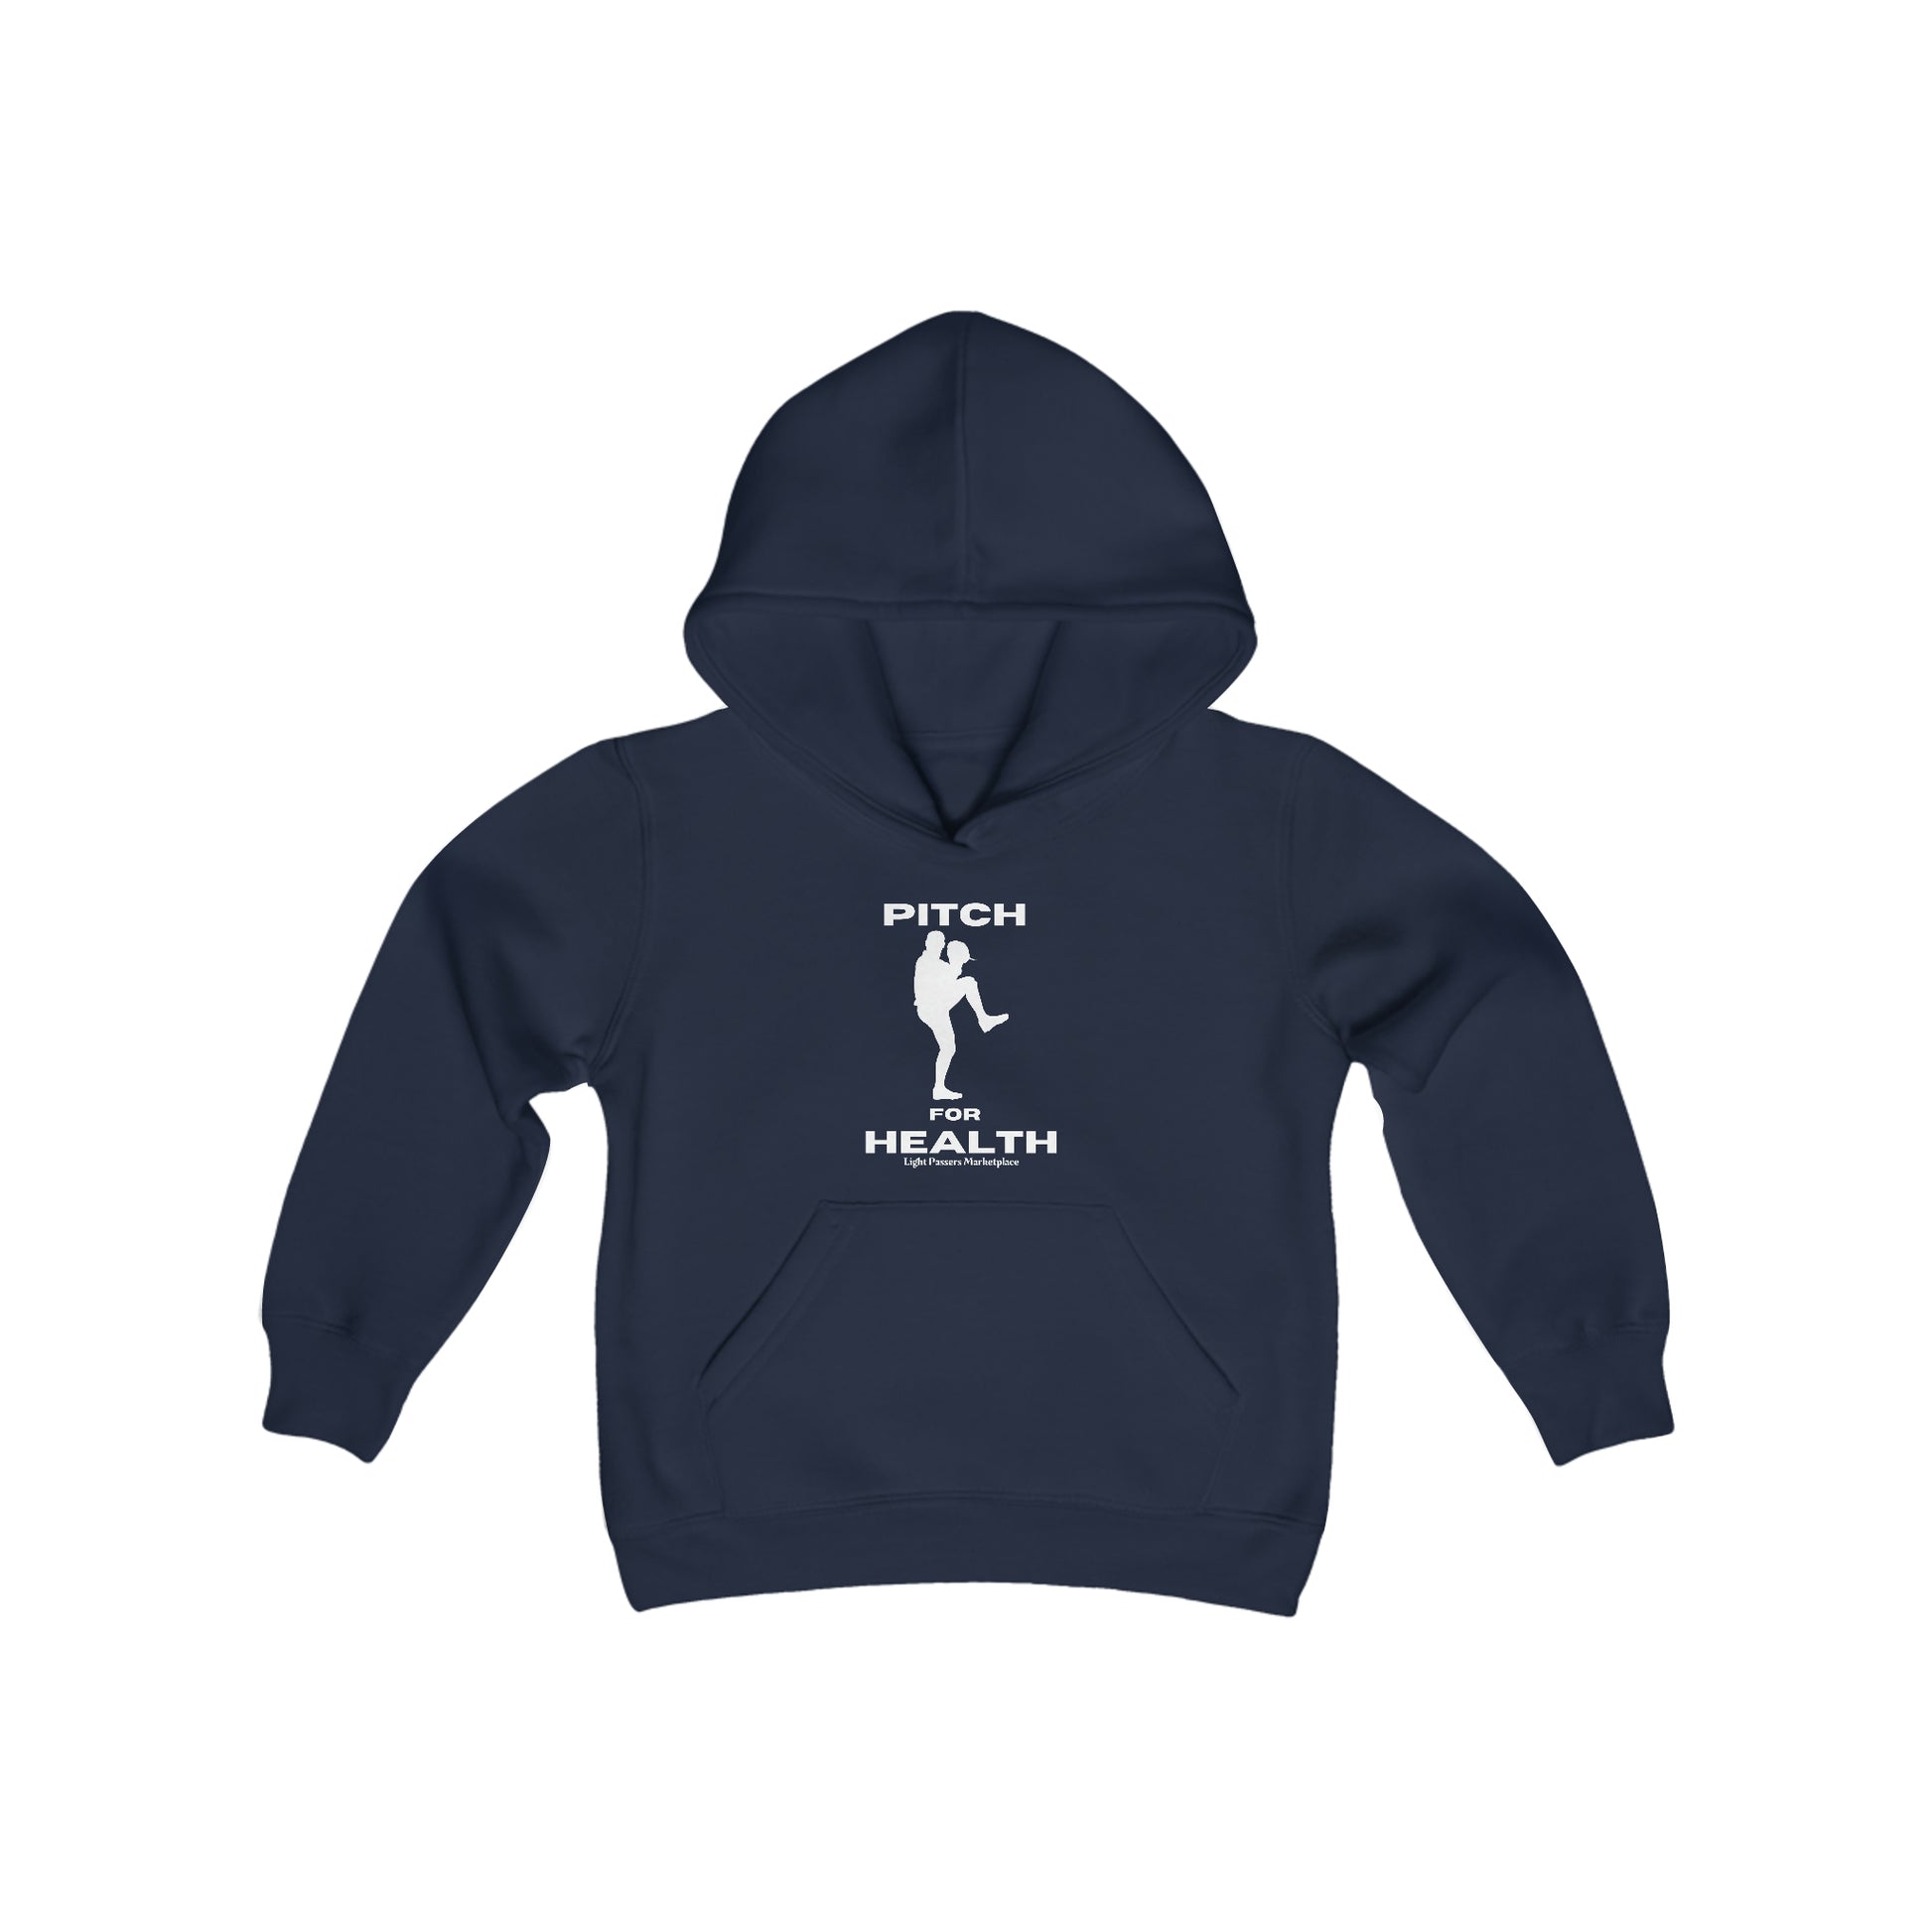 Youth blue hoodie with kangaroo pocket, soft fleece blend (50% cotton, 50% polyester). Reinforced neck, ideal for printing. Comfortable and durable for everyday wear.